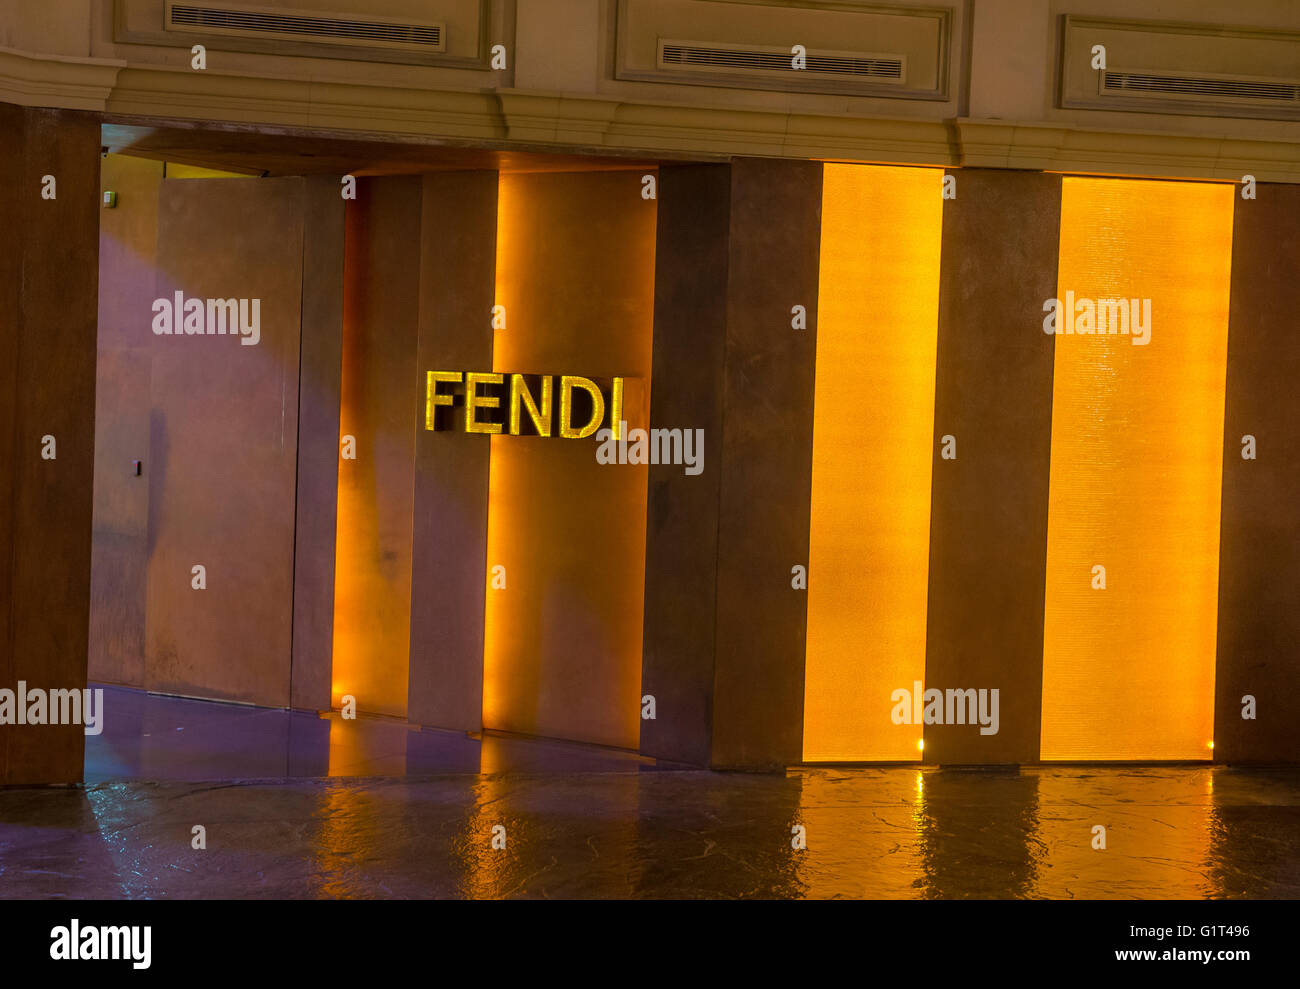 LAS VEGAS - APRIL 13 : Exterior Of A Fendi Store In Caesars Palace Hotel In Las  Vegas On April 13 , 2016. Fendi Is A Multinational Luxury Goods Brand Owned  By